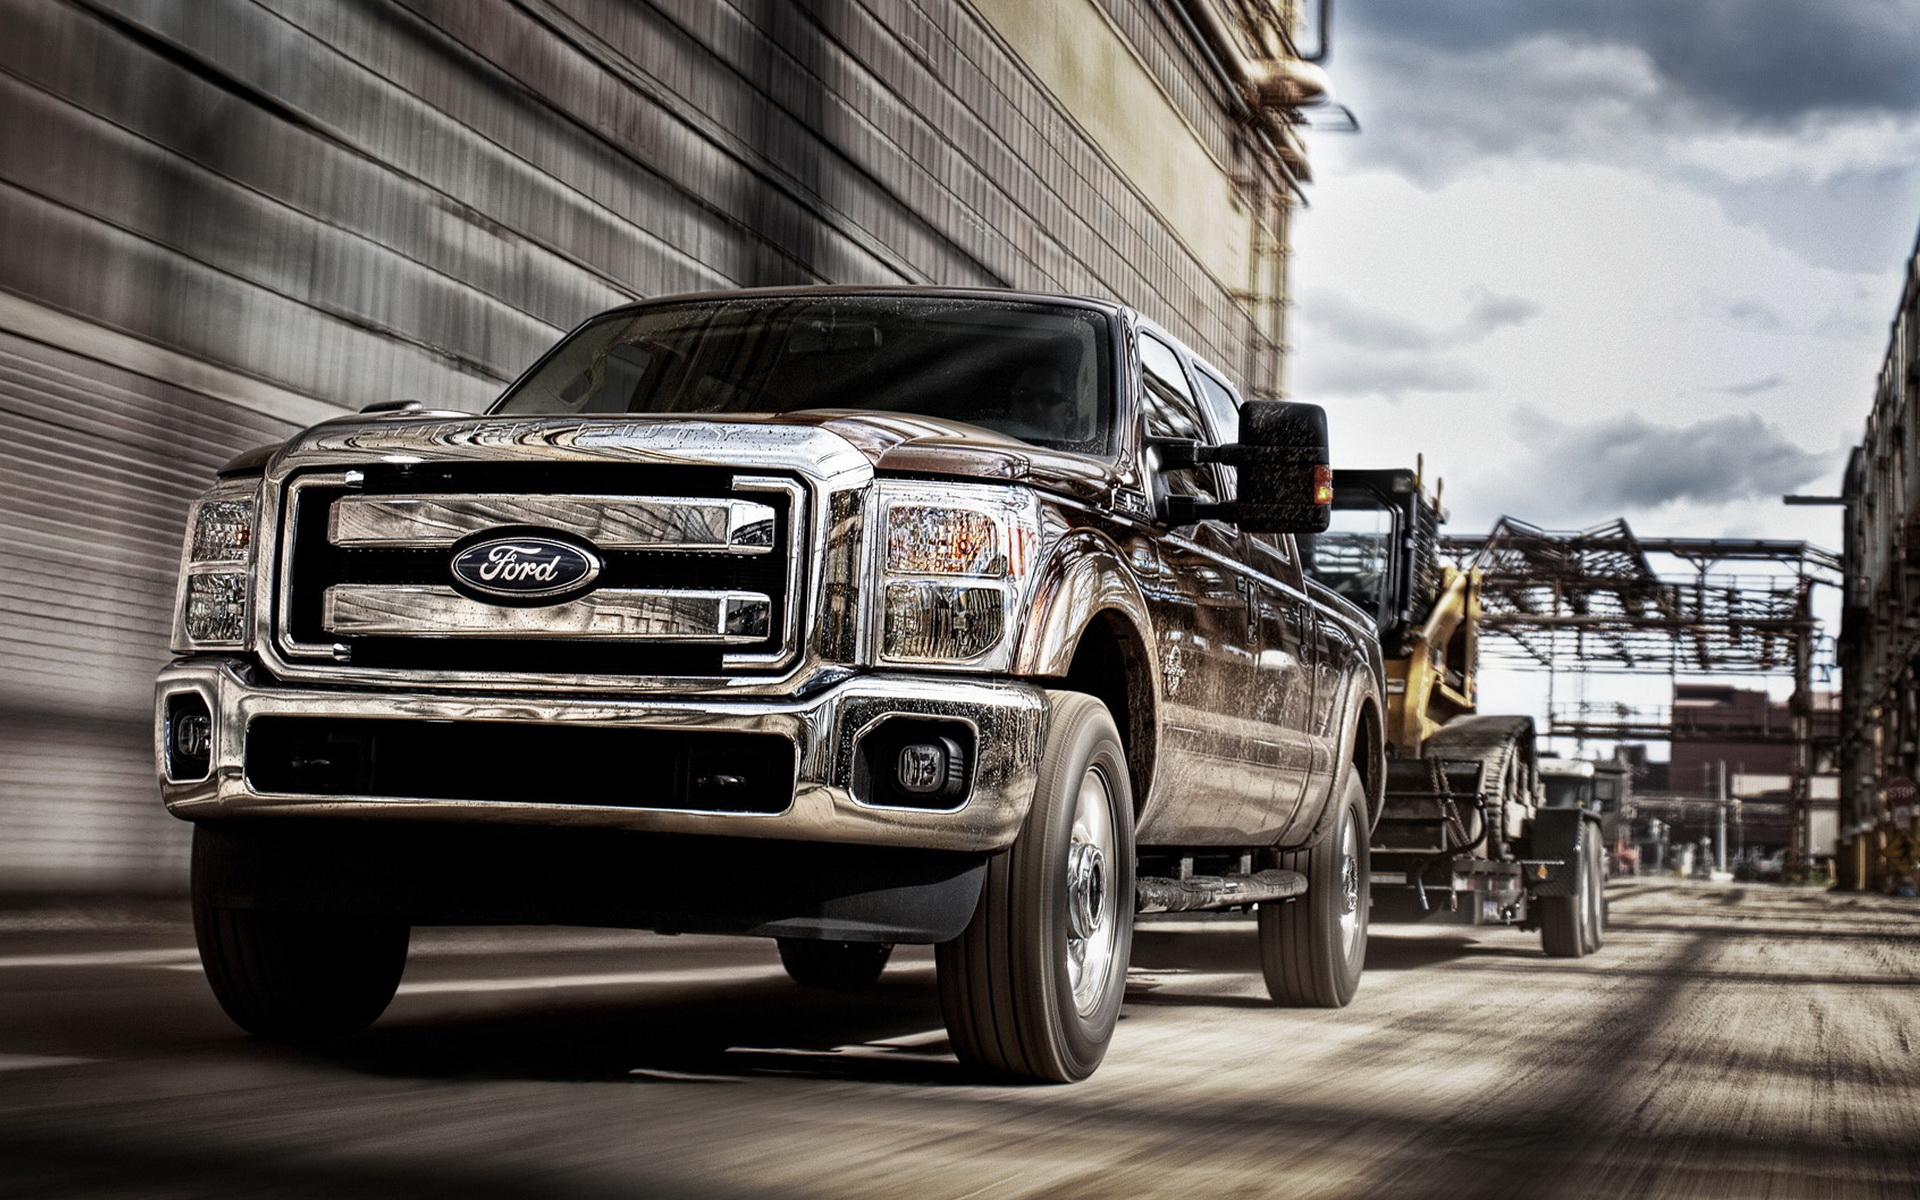 https://www.zastavki.com/pictures/1920x1200/2010/Auto_Ford_Others_Ford_Ford-F-Series-Super-Duty_026027_.jpg